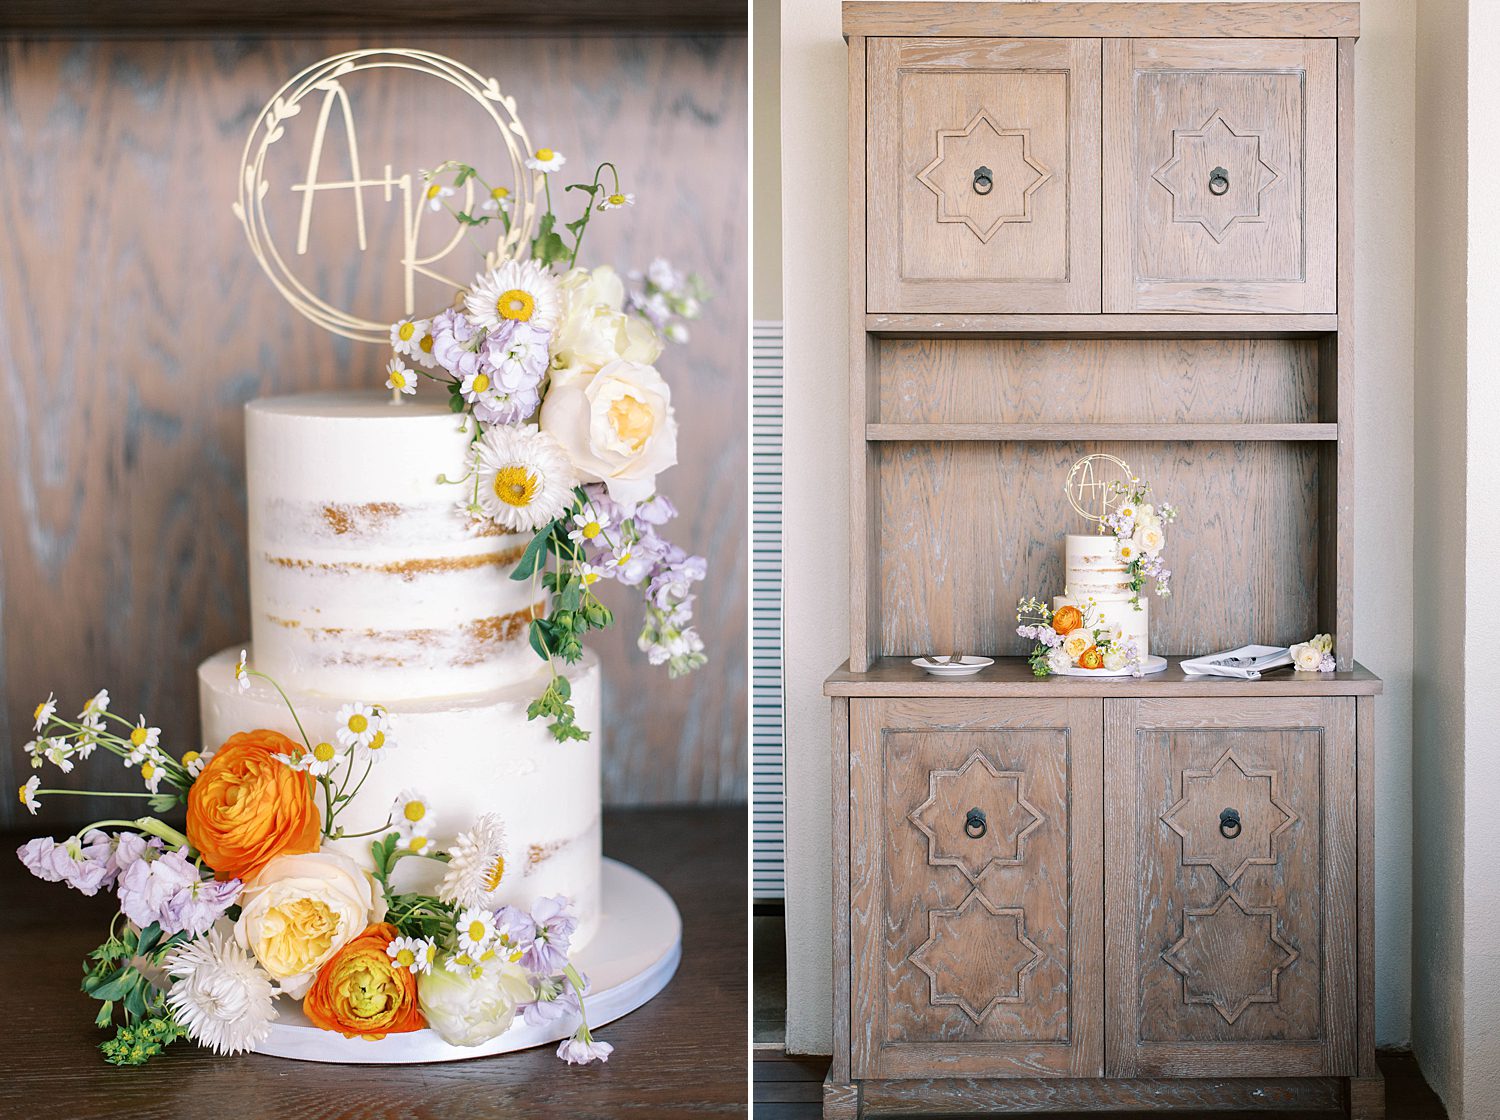 tiered wedding cake with bright floral accents